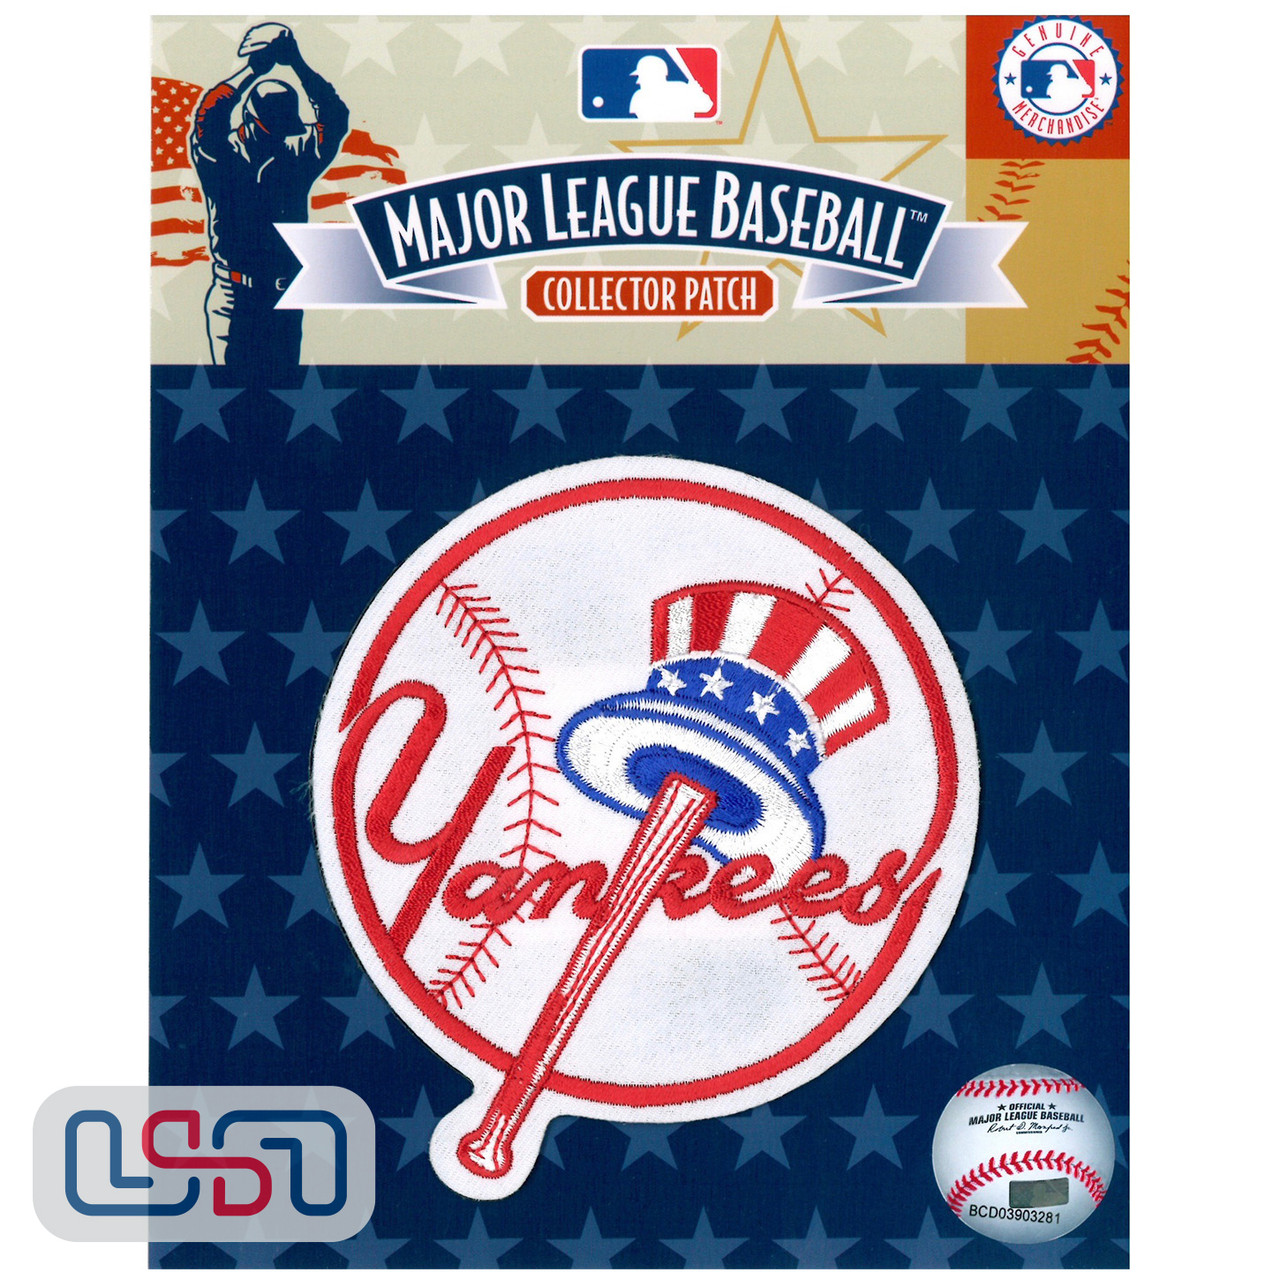 New York Yankees Primary Team MLB Logo Jersey Sleeve Patch Licensed